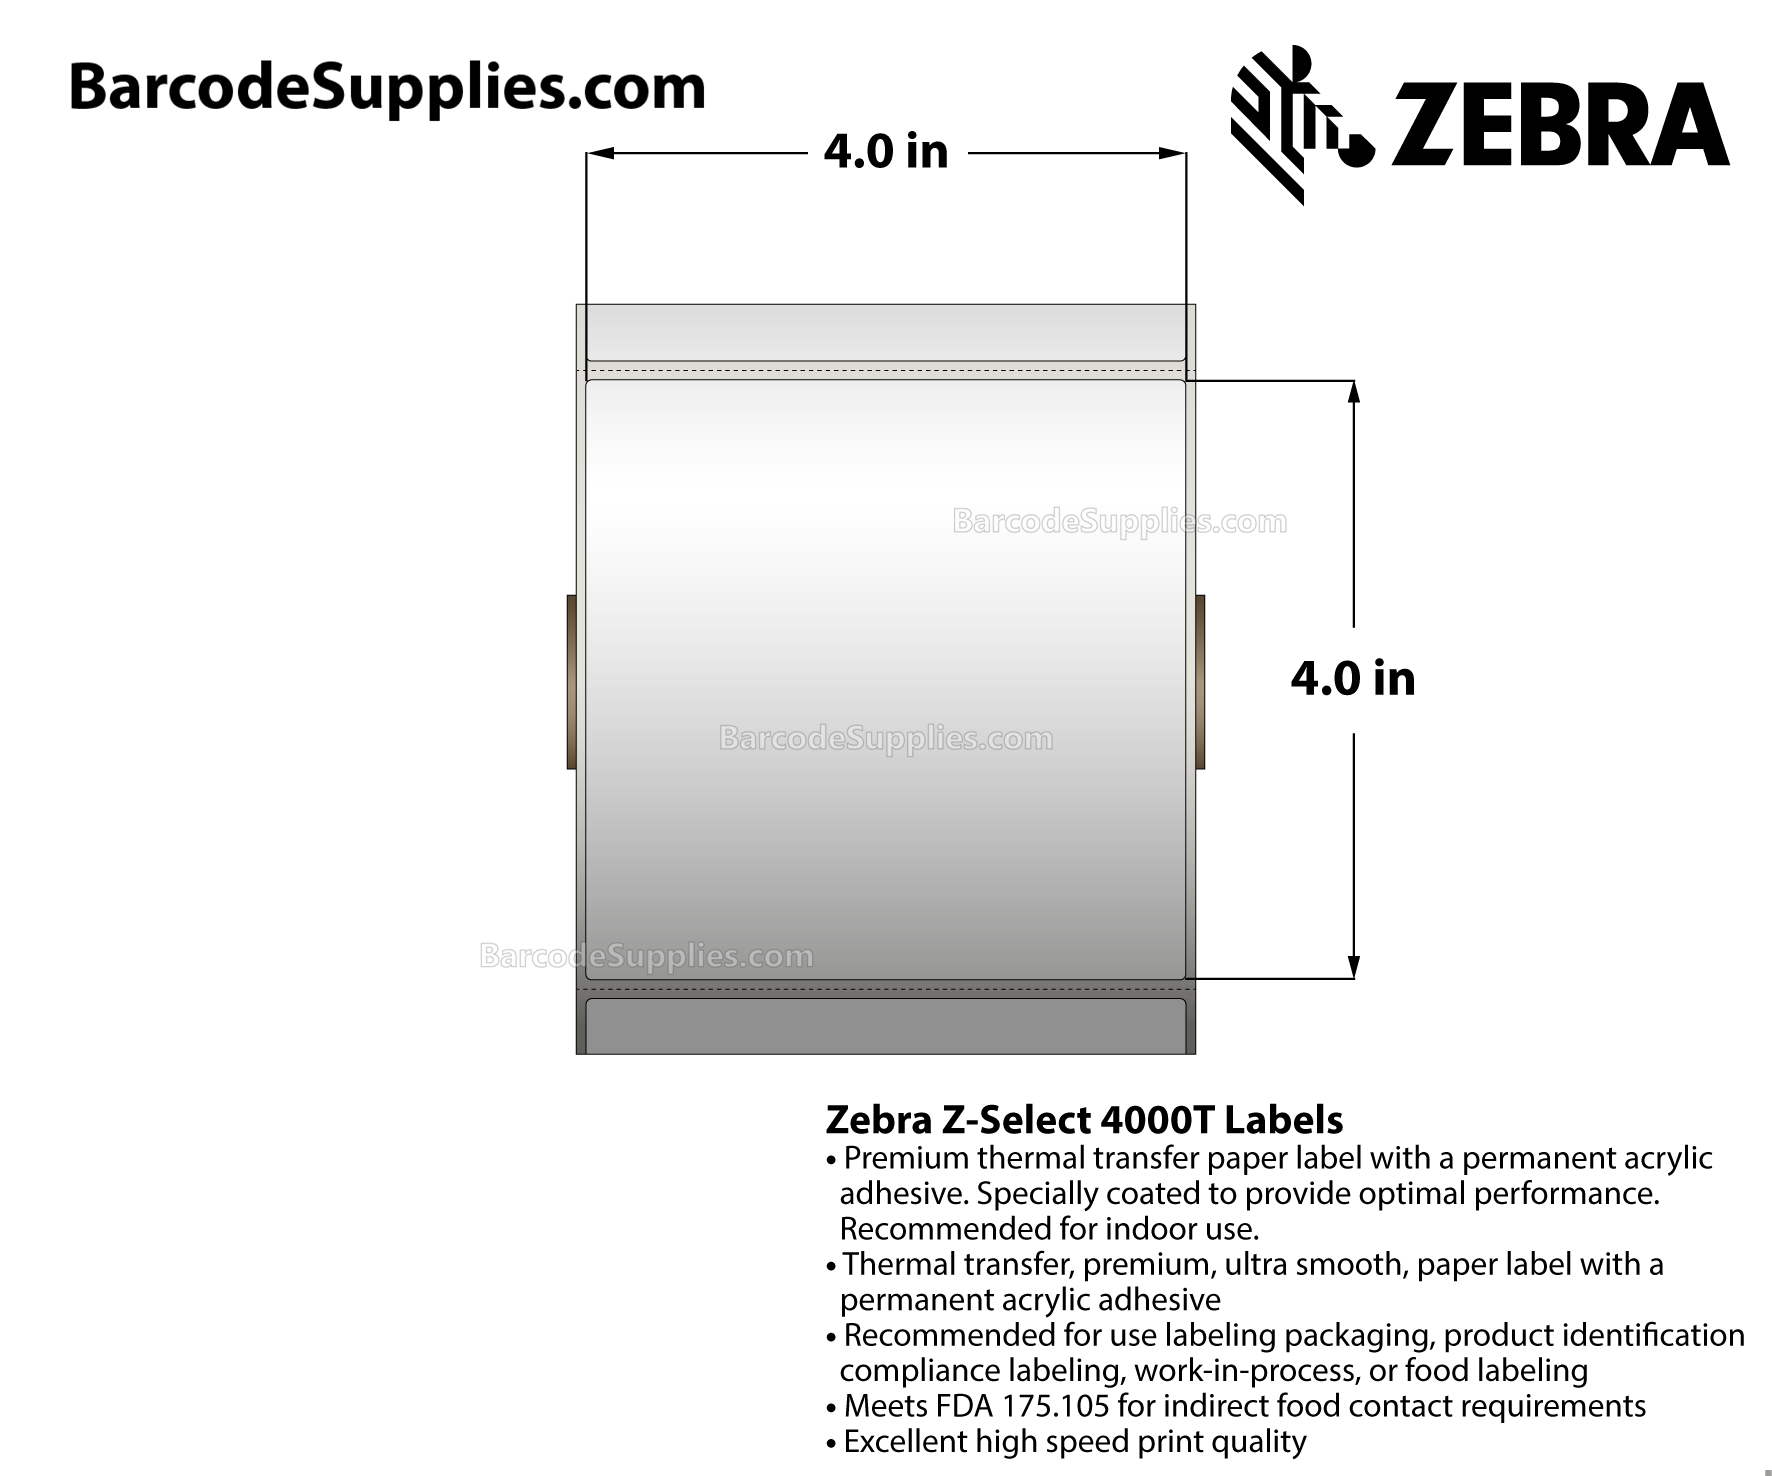 4 x 4 Thermal Transfer White Z-Select 4000T Labels With Permanent Adhesive - Perforated - 700 Labels Per Roll - Carton Of 12 Rolls - 8400 Labels Total - MPN: 800274-405